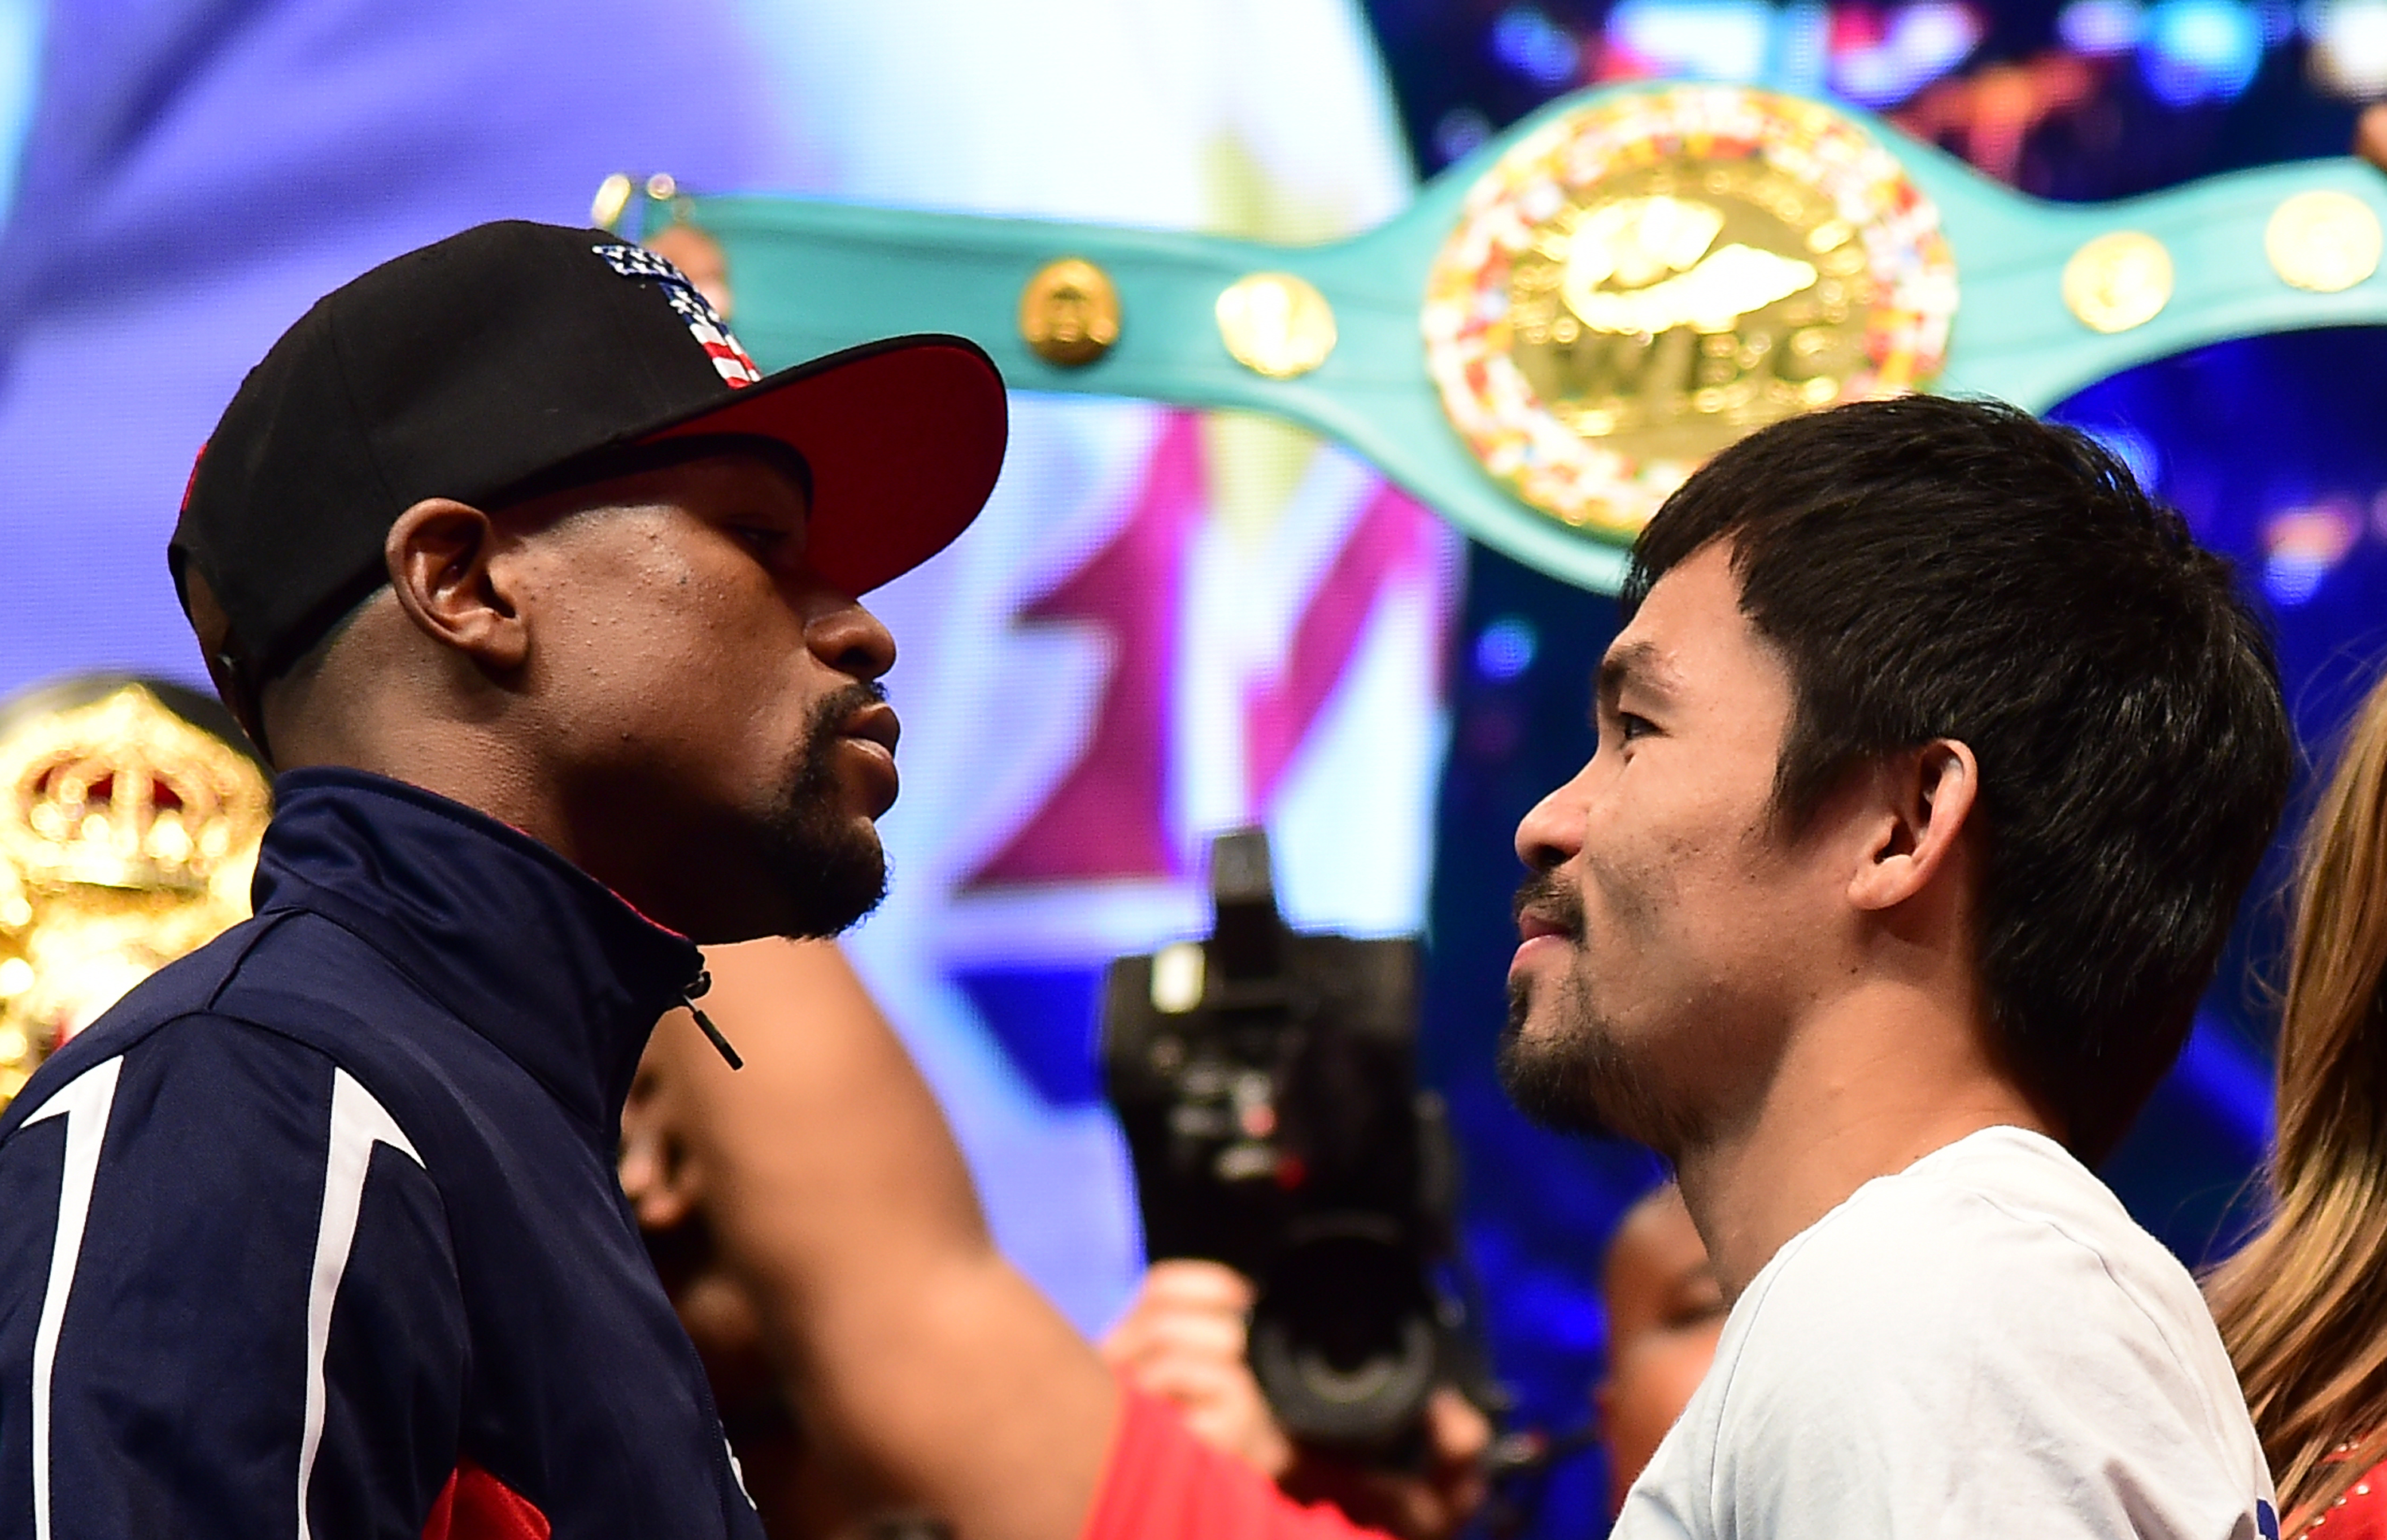 Floyd Mayweather and Manny Pacquiao face off following their weigh-in on May 1, 2015 in Las Vegas, Nevada one day before their "Fight of the Century" on May 2 at the MGM Grand Garden Arena. AFP PHOTO / FREDERIC J. BROWN / AFP PHOTO / FREDERIC J. BROWN